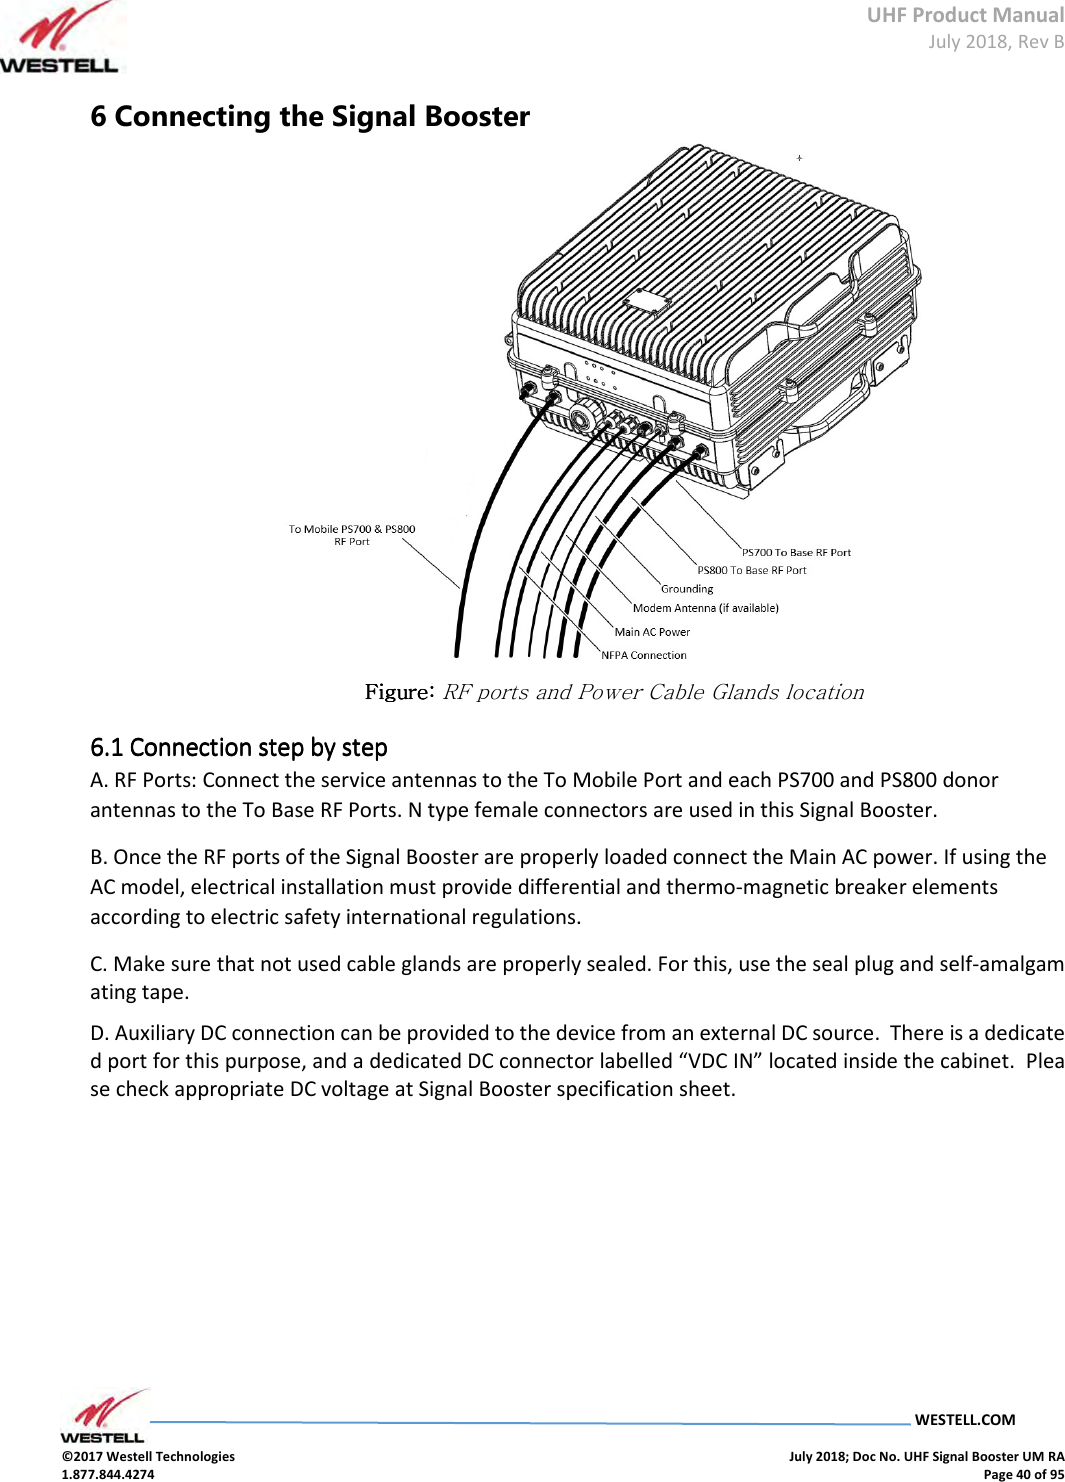 UHF Product Manual July 2018, Rev B   WESTELL.COM  ©2017 Westell Technologies    July 2018; Doc No. UHF Signal Booster UM RA 1.877.844.4274    Page 40 of 95  6 Connecting the Signal Booster  Figure: Figure: Figure: Figure: RF ports and Power Cable Glands location 6.1 6.1 6.1 6.1 Connection step by stepConnection step by stepConnection step by stepConnection step by step    A. RF Ports: Connect the service antennas to the To Mobile Port and each PS700 and PS800 donor antennas to the To Base RF Ports. N type female connectors are used in this Signal Booster. B. Once the RF ports of the Signal Booster are properly loaded connect the Main AC power. If using the AC model, electrical installation must provide differential and thermo-magnetic breaker elements according to electric safety international regulations. C. Make sure that not used cable glands are properly sealed. For this, use the seal plug and self-amalgamating tape.  D. Auxiliary DC connection can be provided to the device from an external DC source.  There is a dedicated port for this purpose, and a dedicated DC connector labelled “VDC IN” located inside the cabinet.  Please check appropriate DC voltage at Signal Booster specification sheet.          